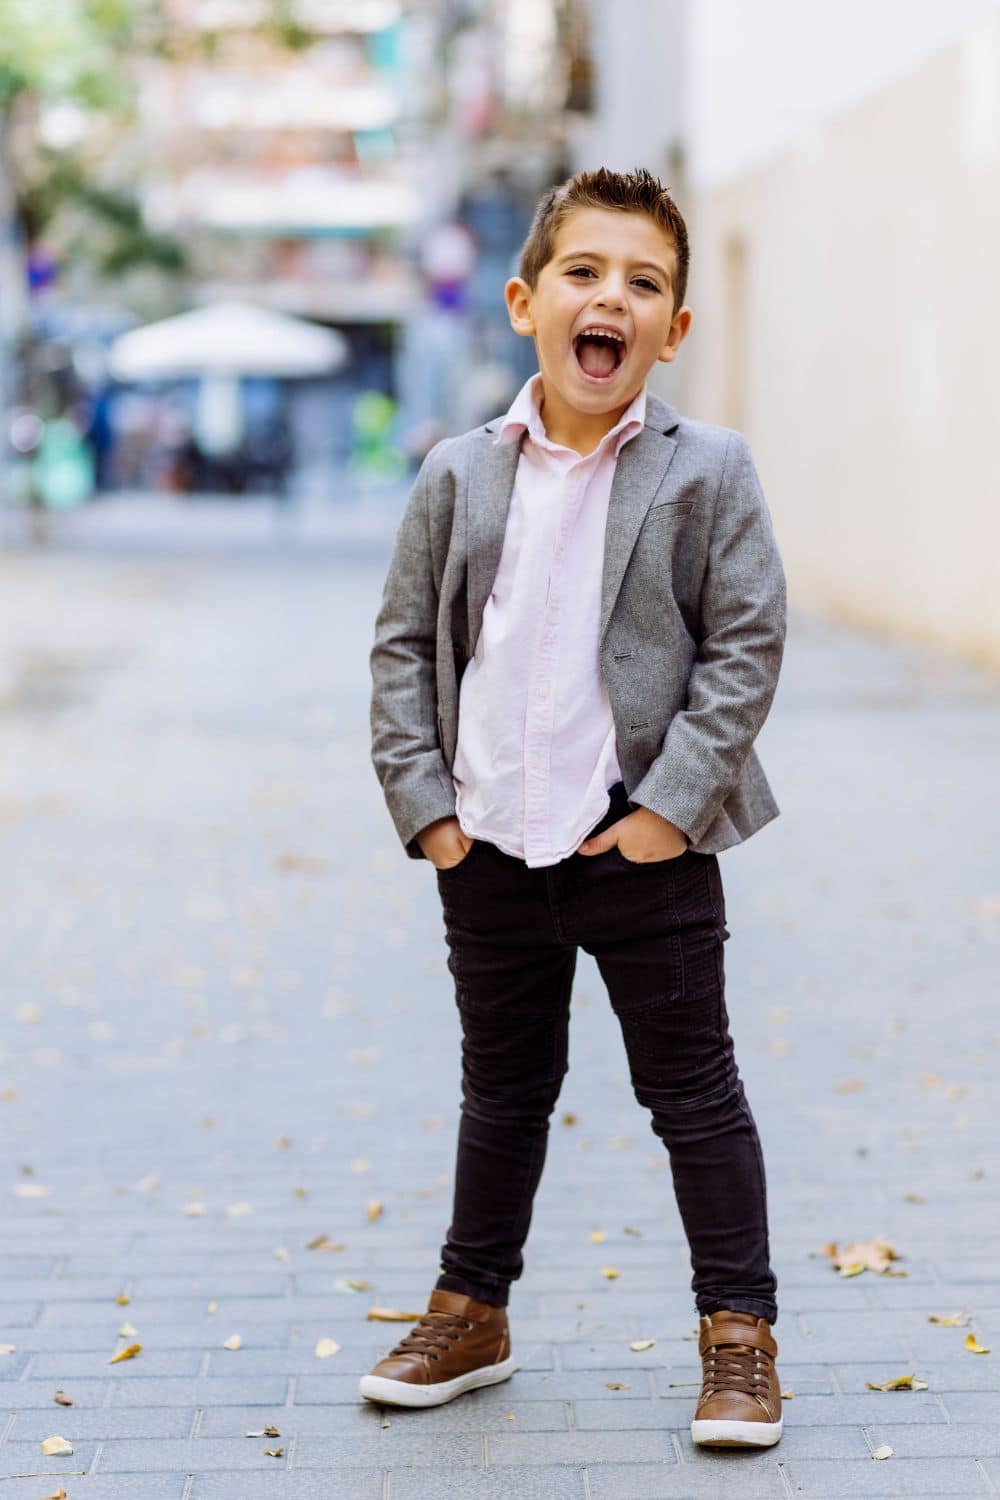 Help Your Children Choose the Perfect Outfit